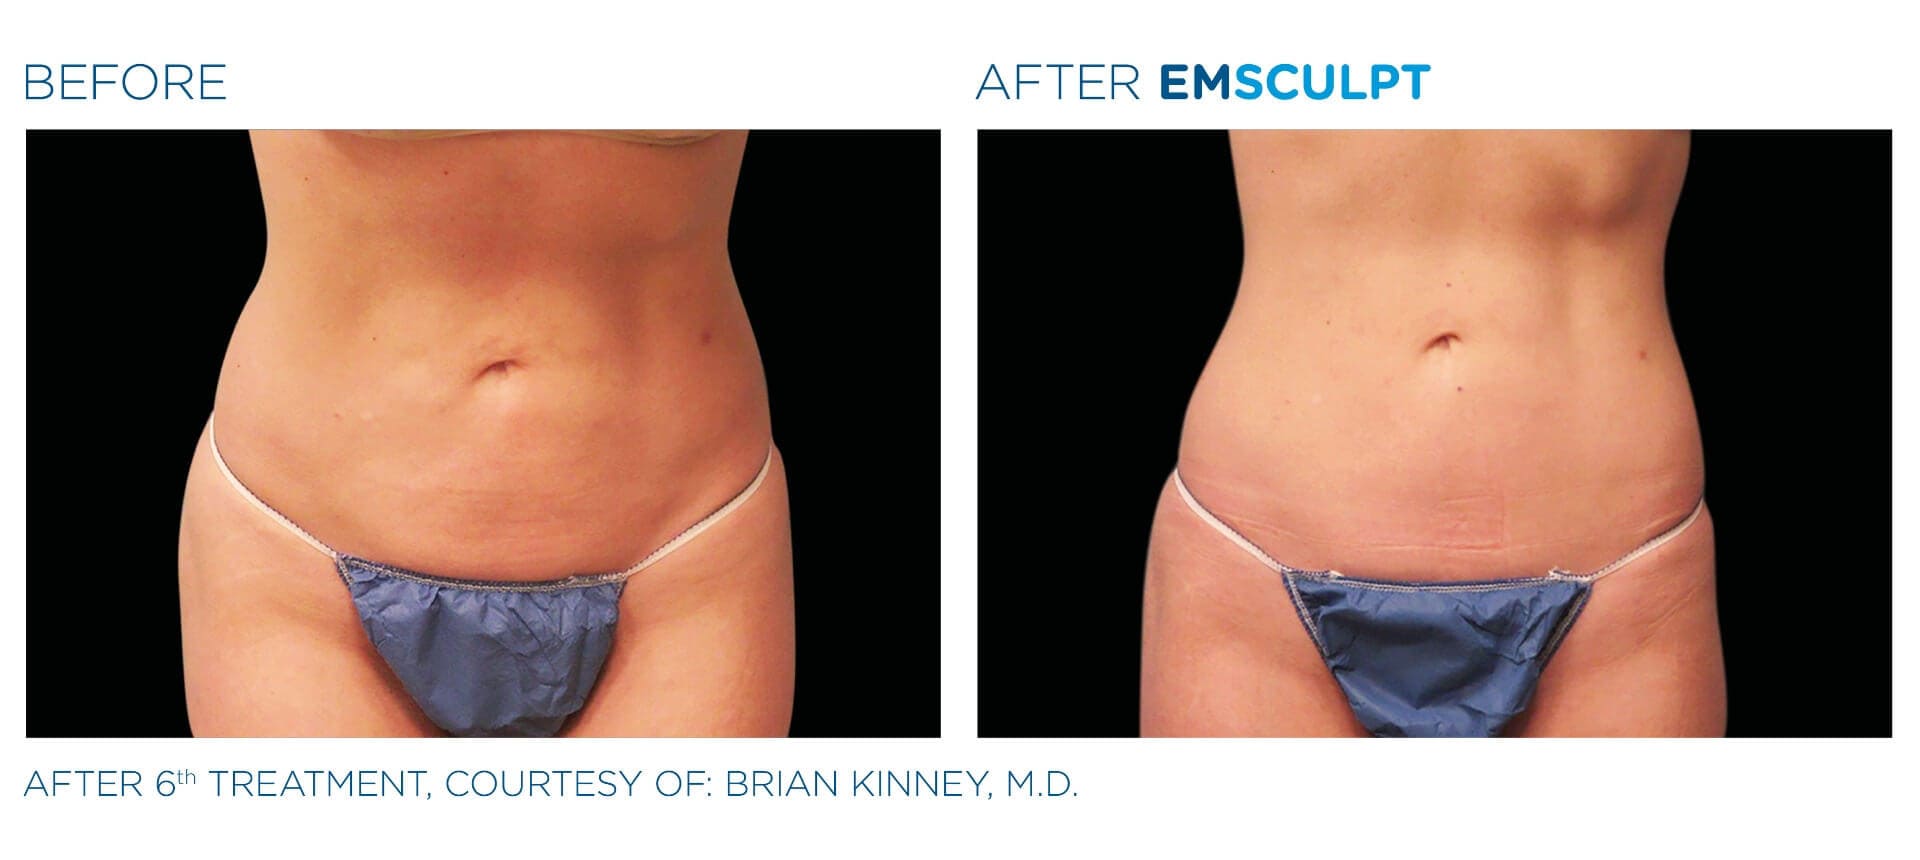 Body Contouring with Emsculpt Before and After Photos women two